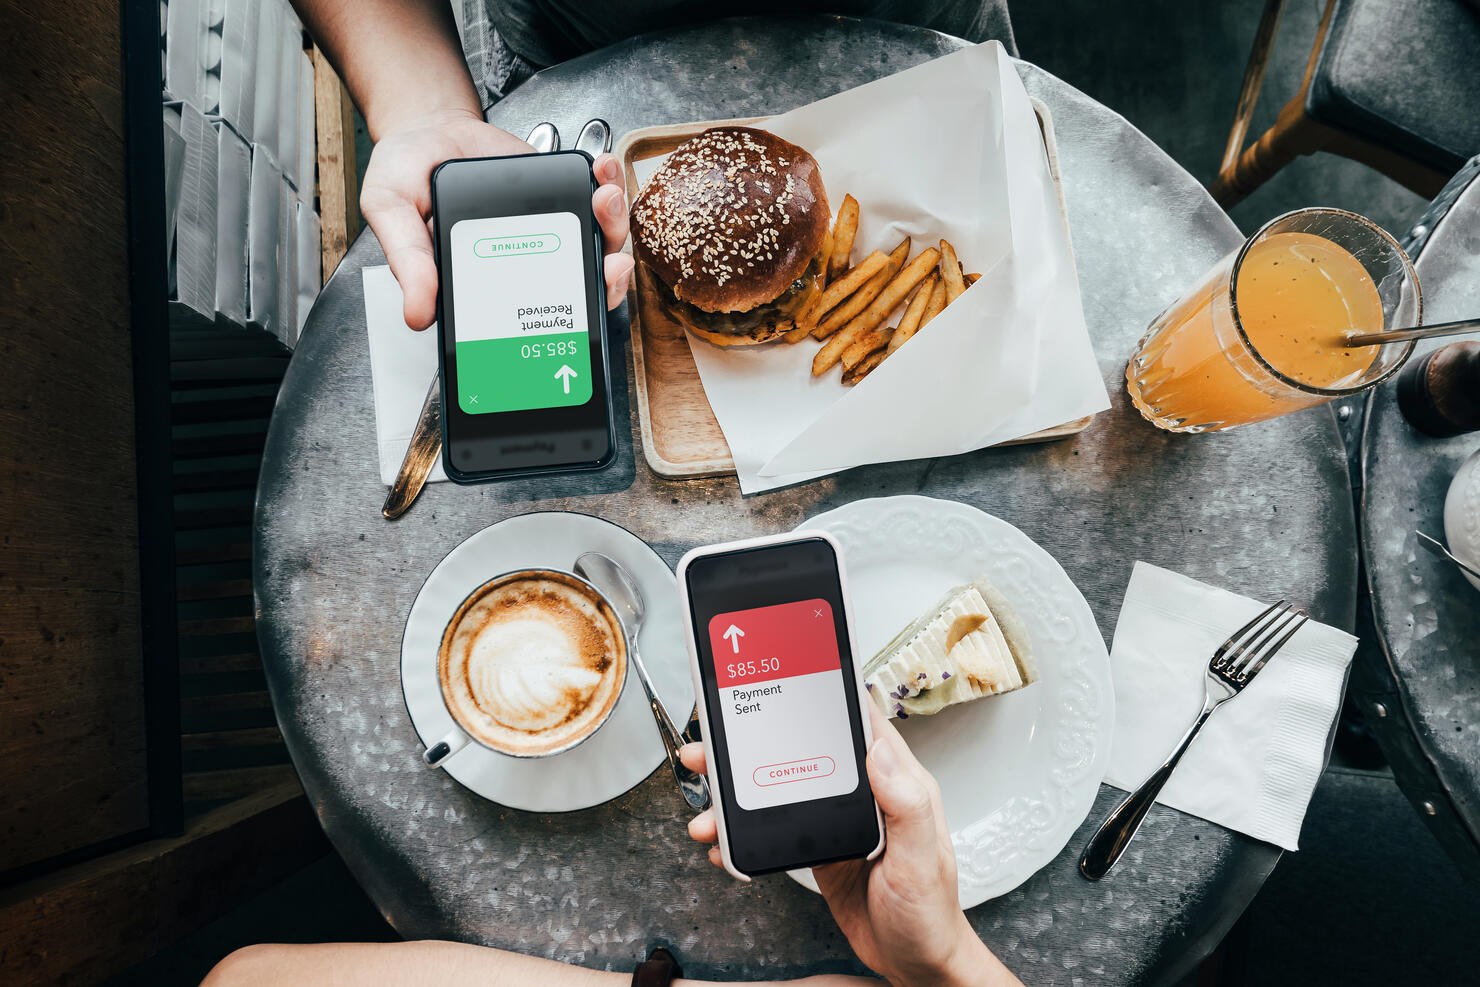 Overhead view of friends sending/receiving the payment of the meal through digital wallet device on smartphone while dining together in a restaurant